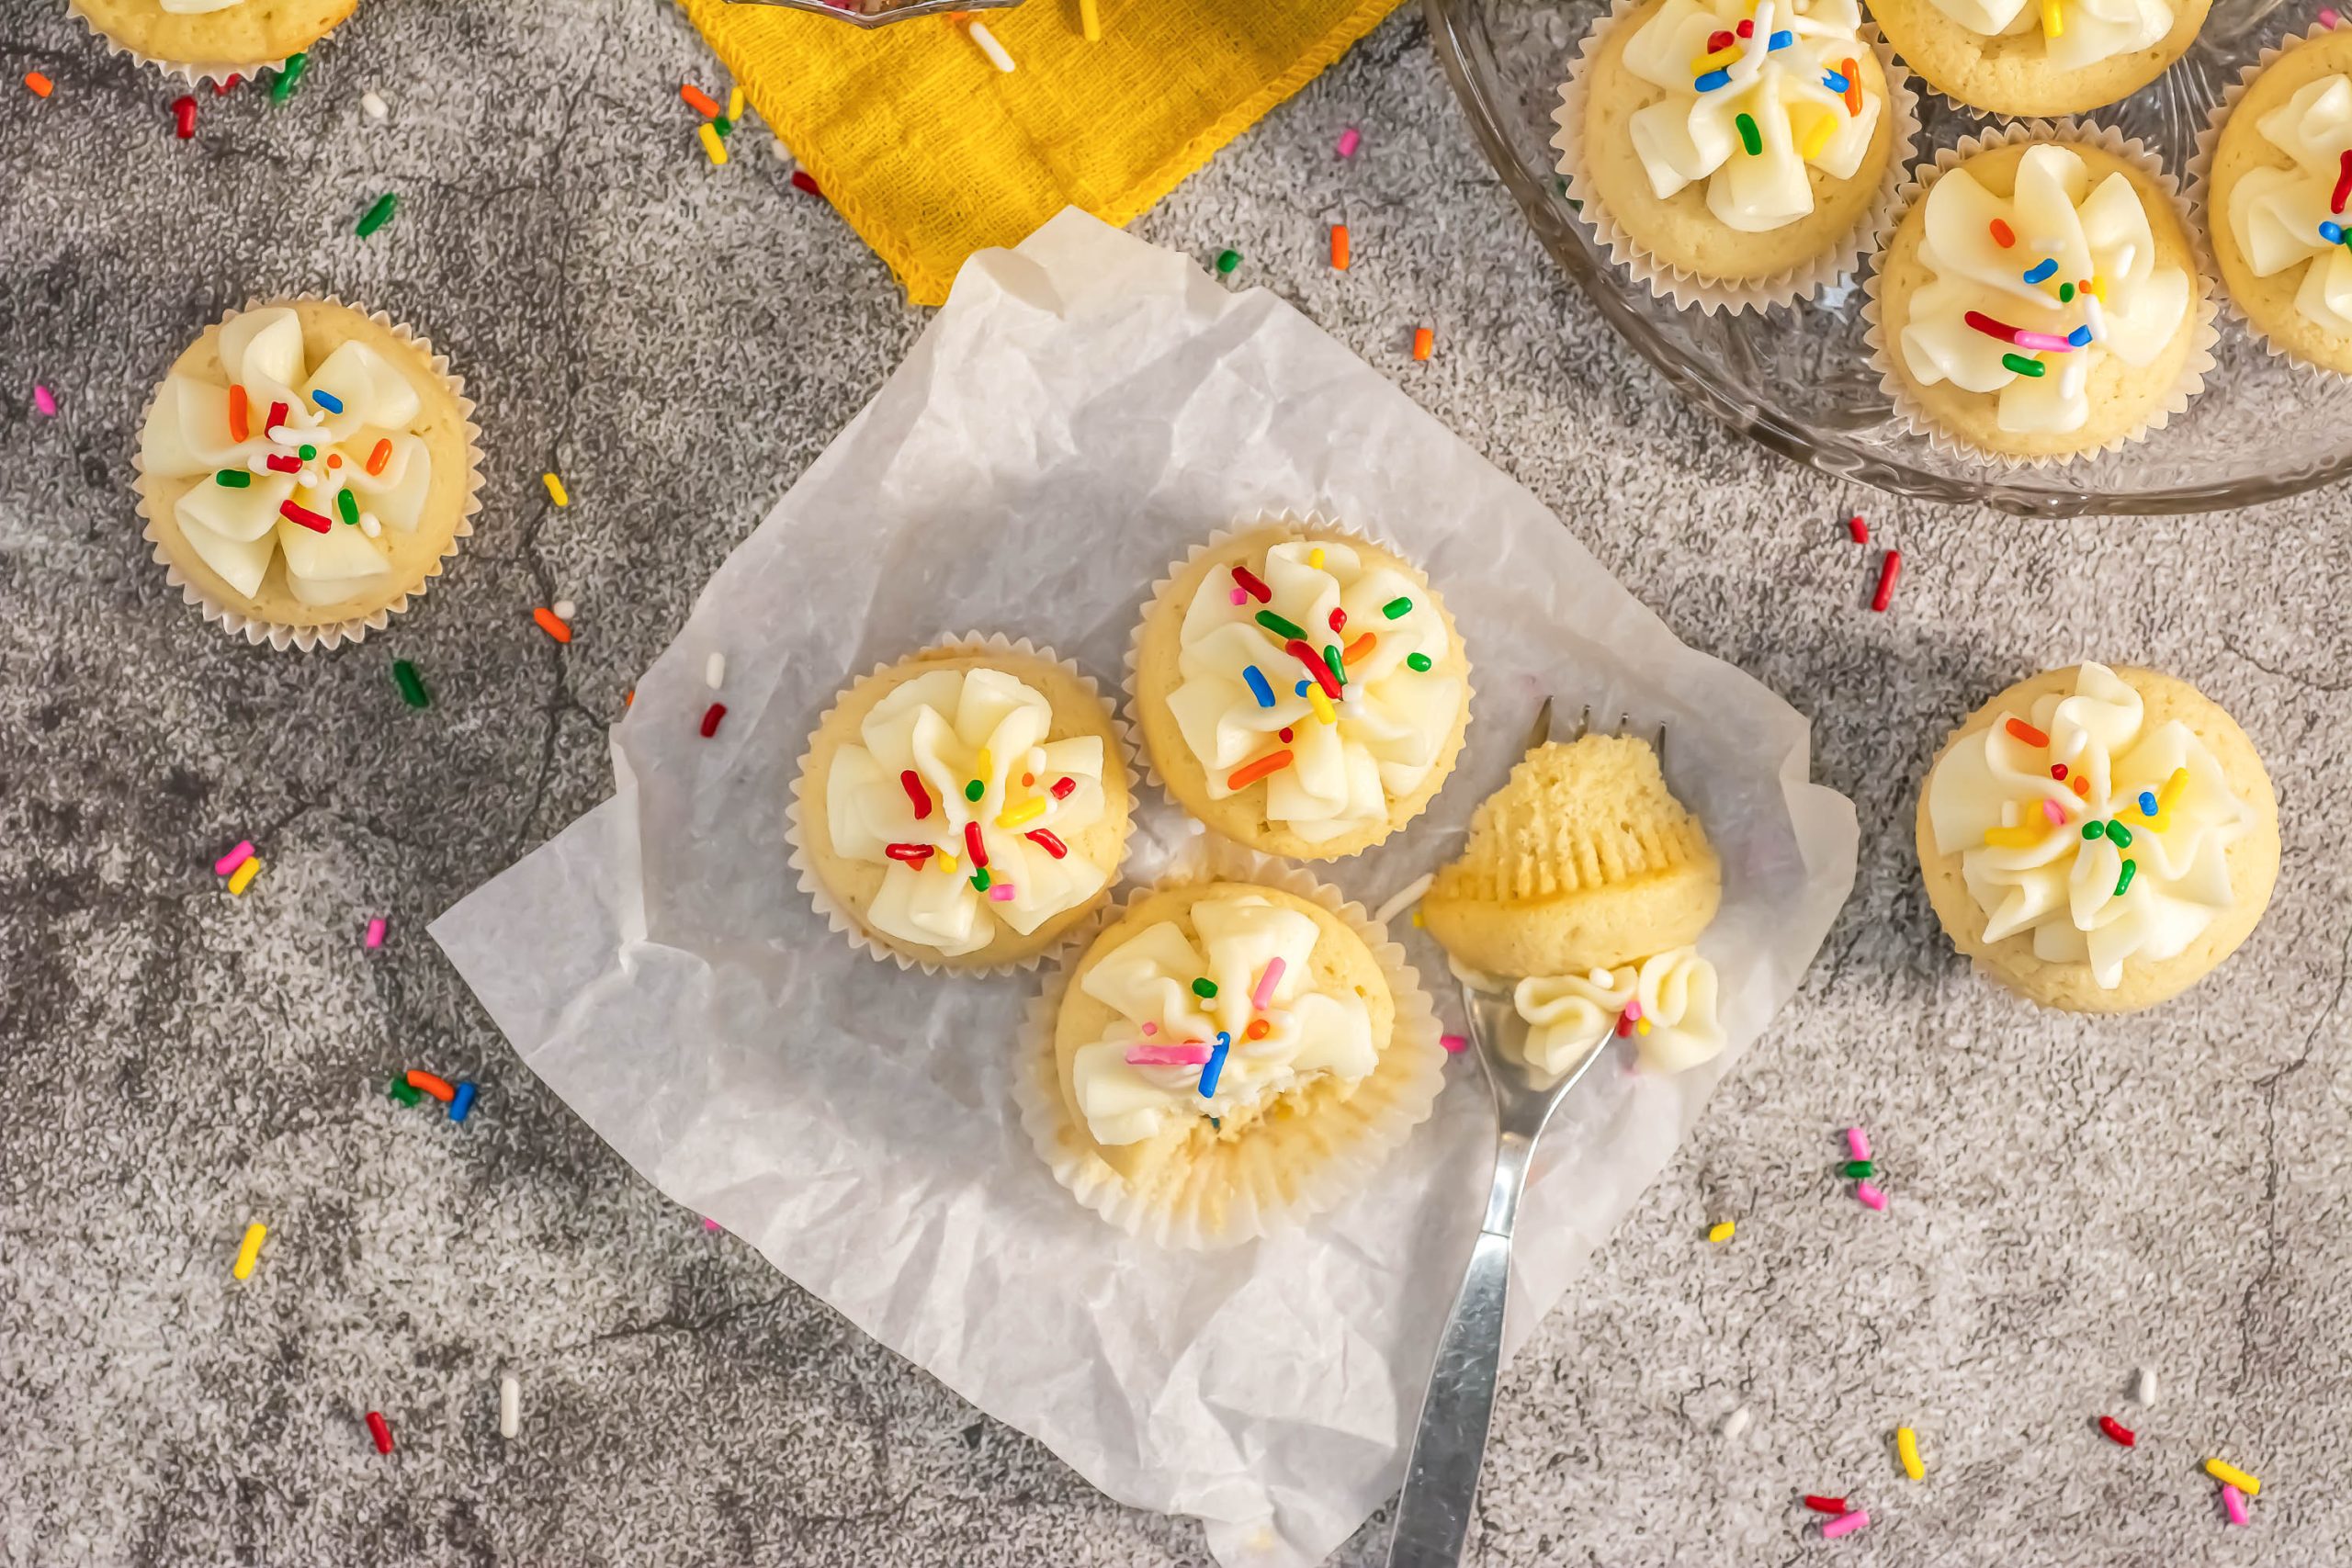 A Classic Vanilla Cupcake with frosting and sprinkles.